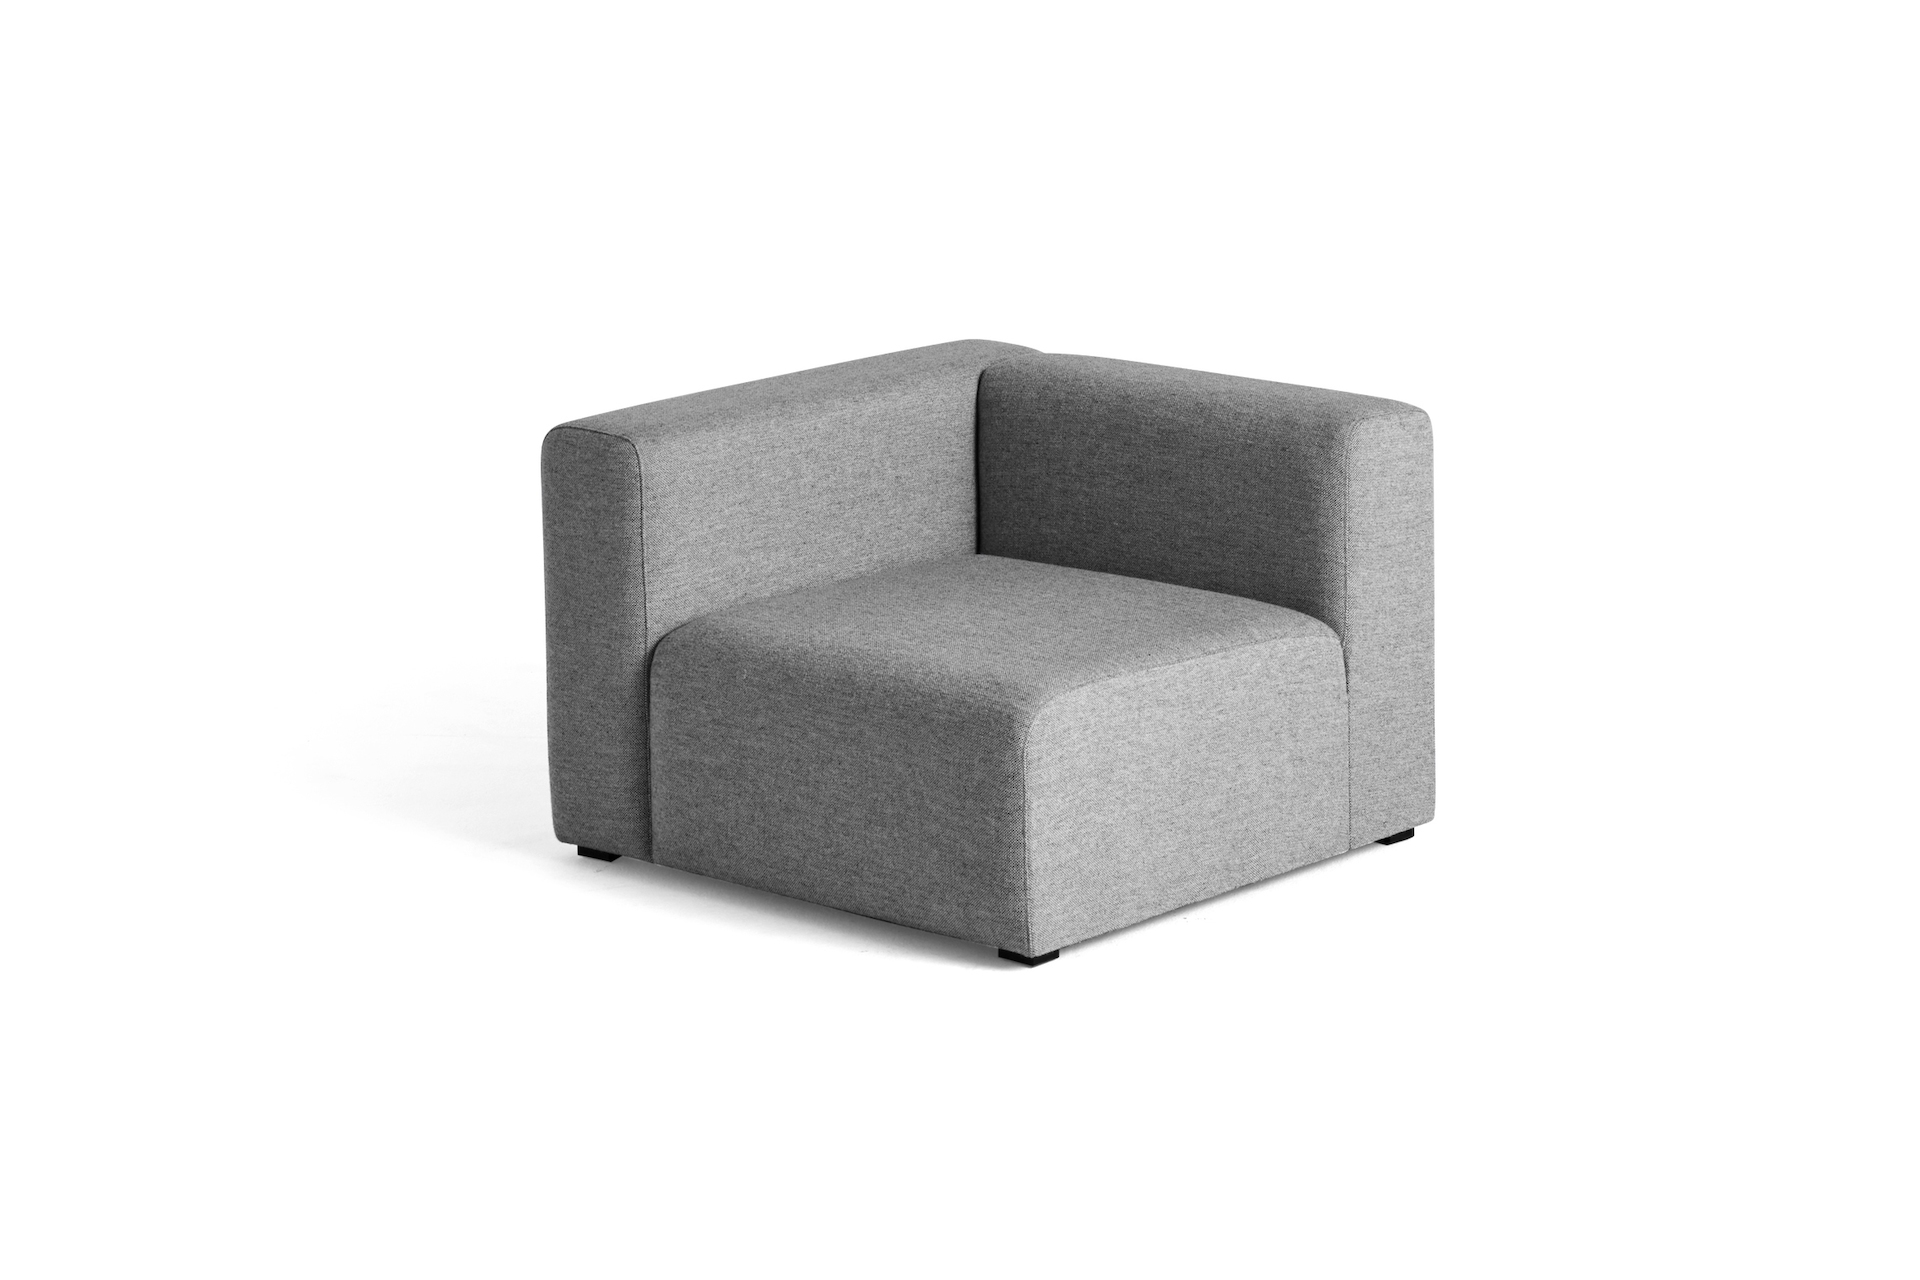 Grey Mags Sectional Sofa end module with left armrest, viewed at an angle.